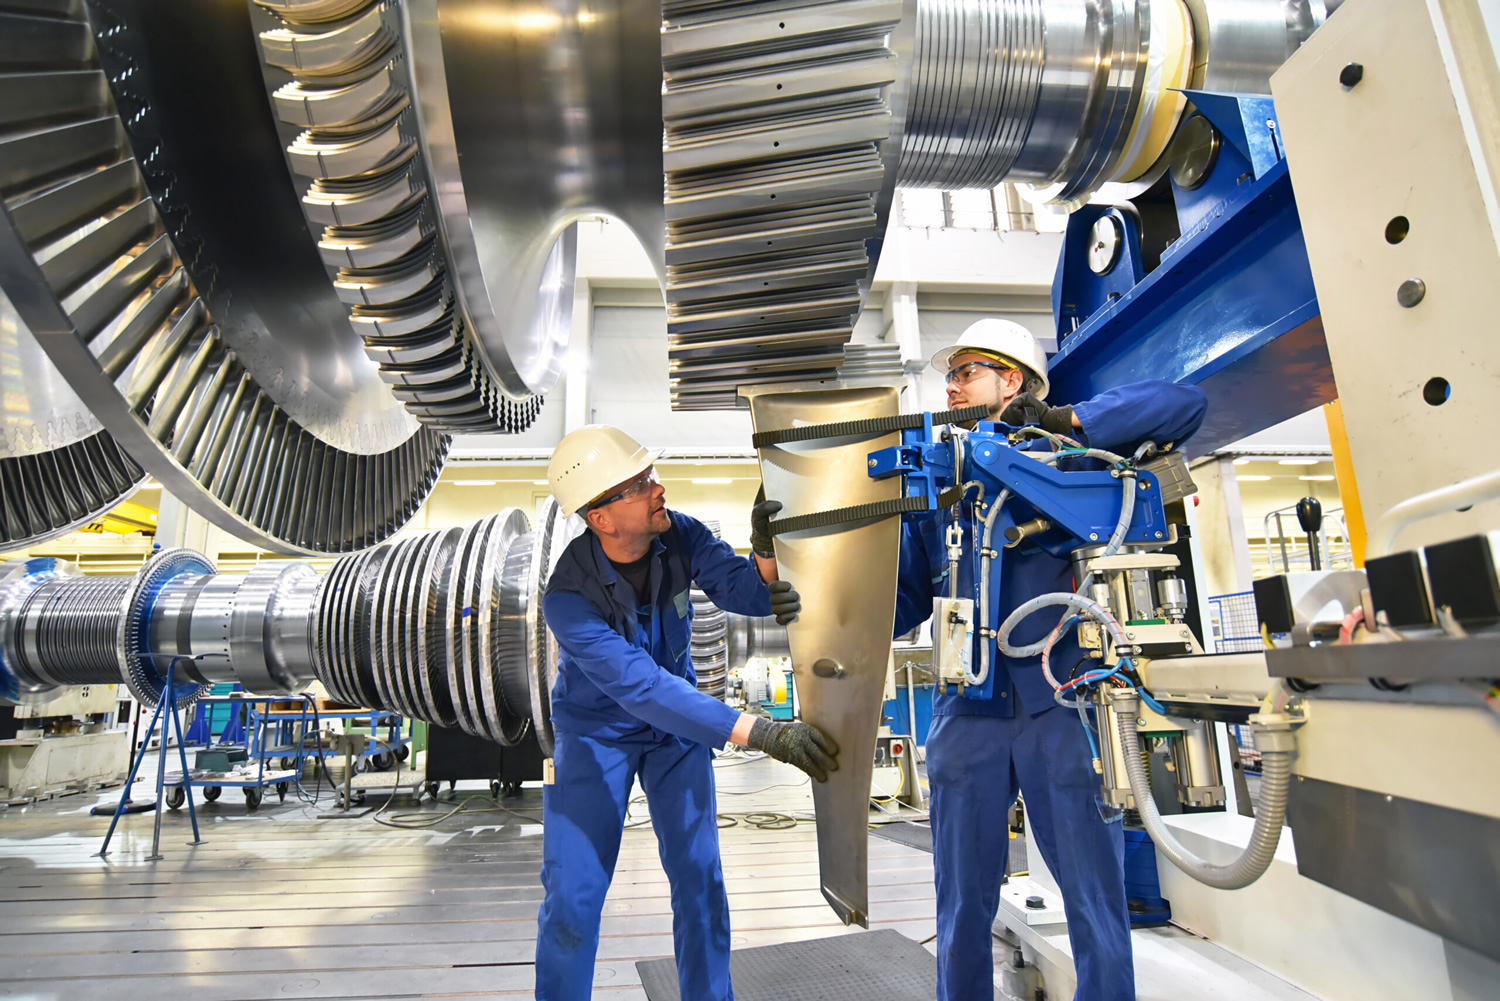 Improving plant’s reliability and delivering business value